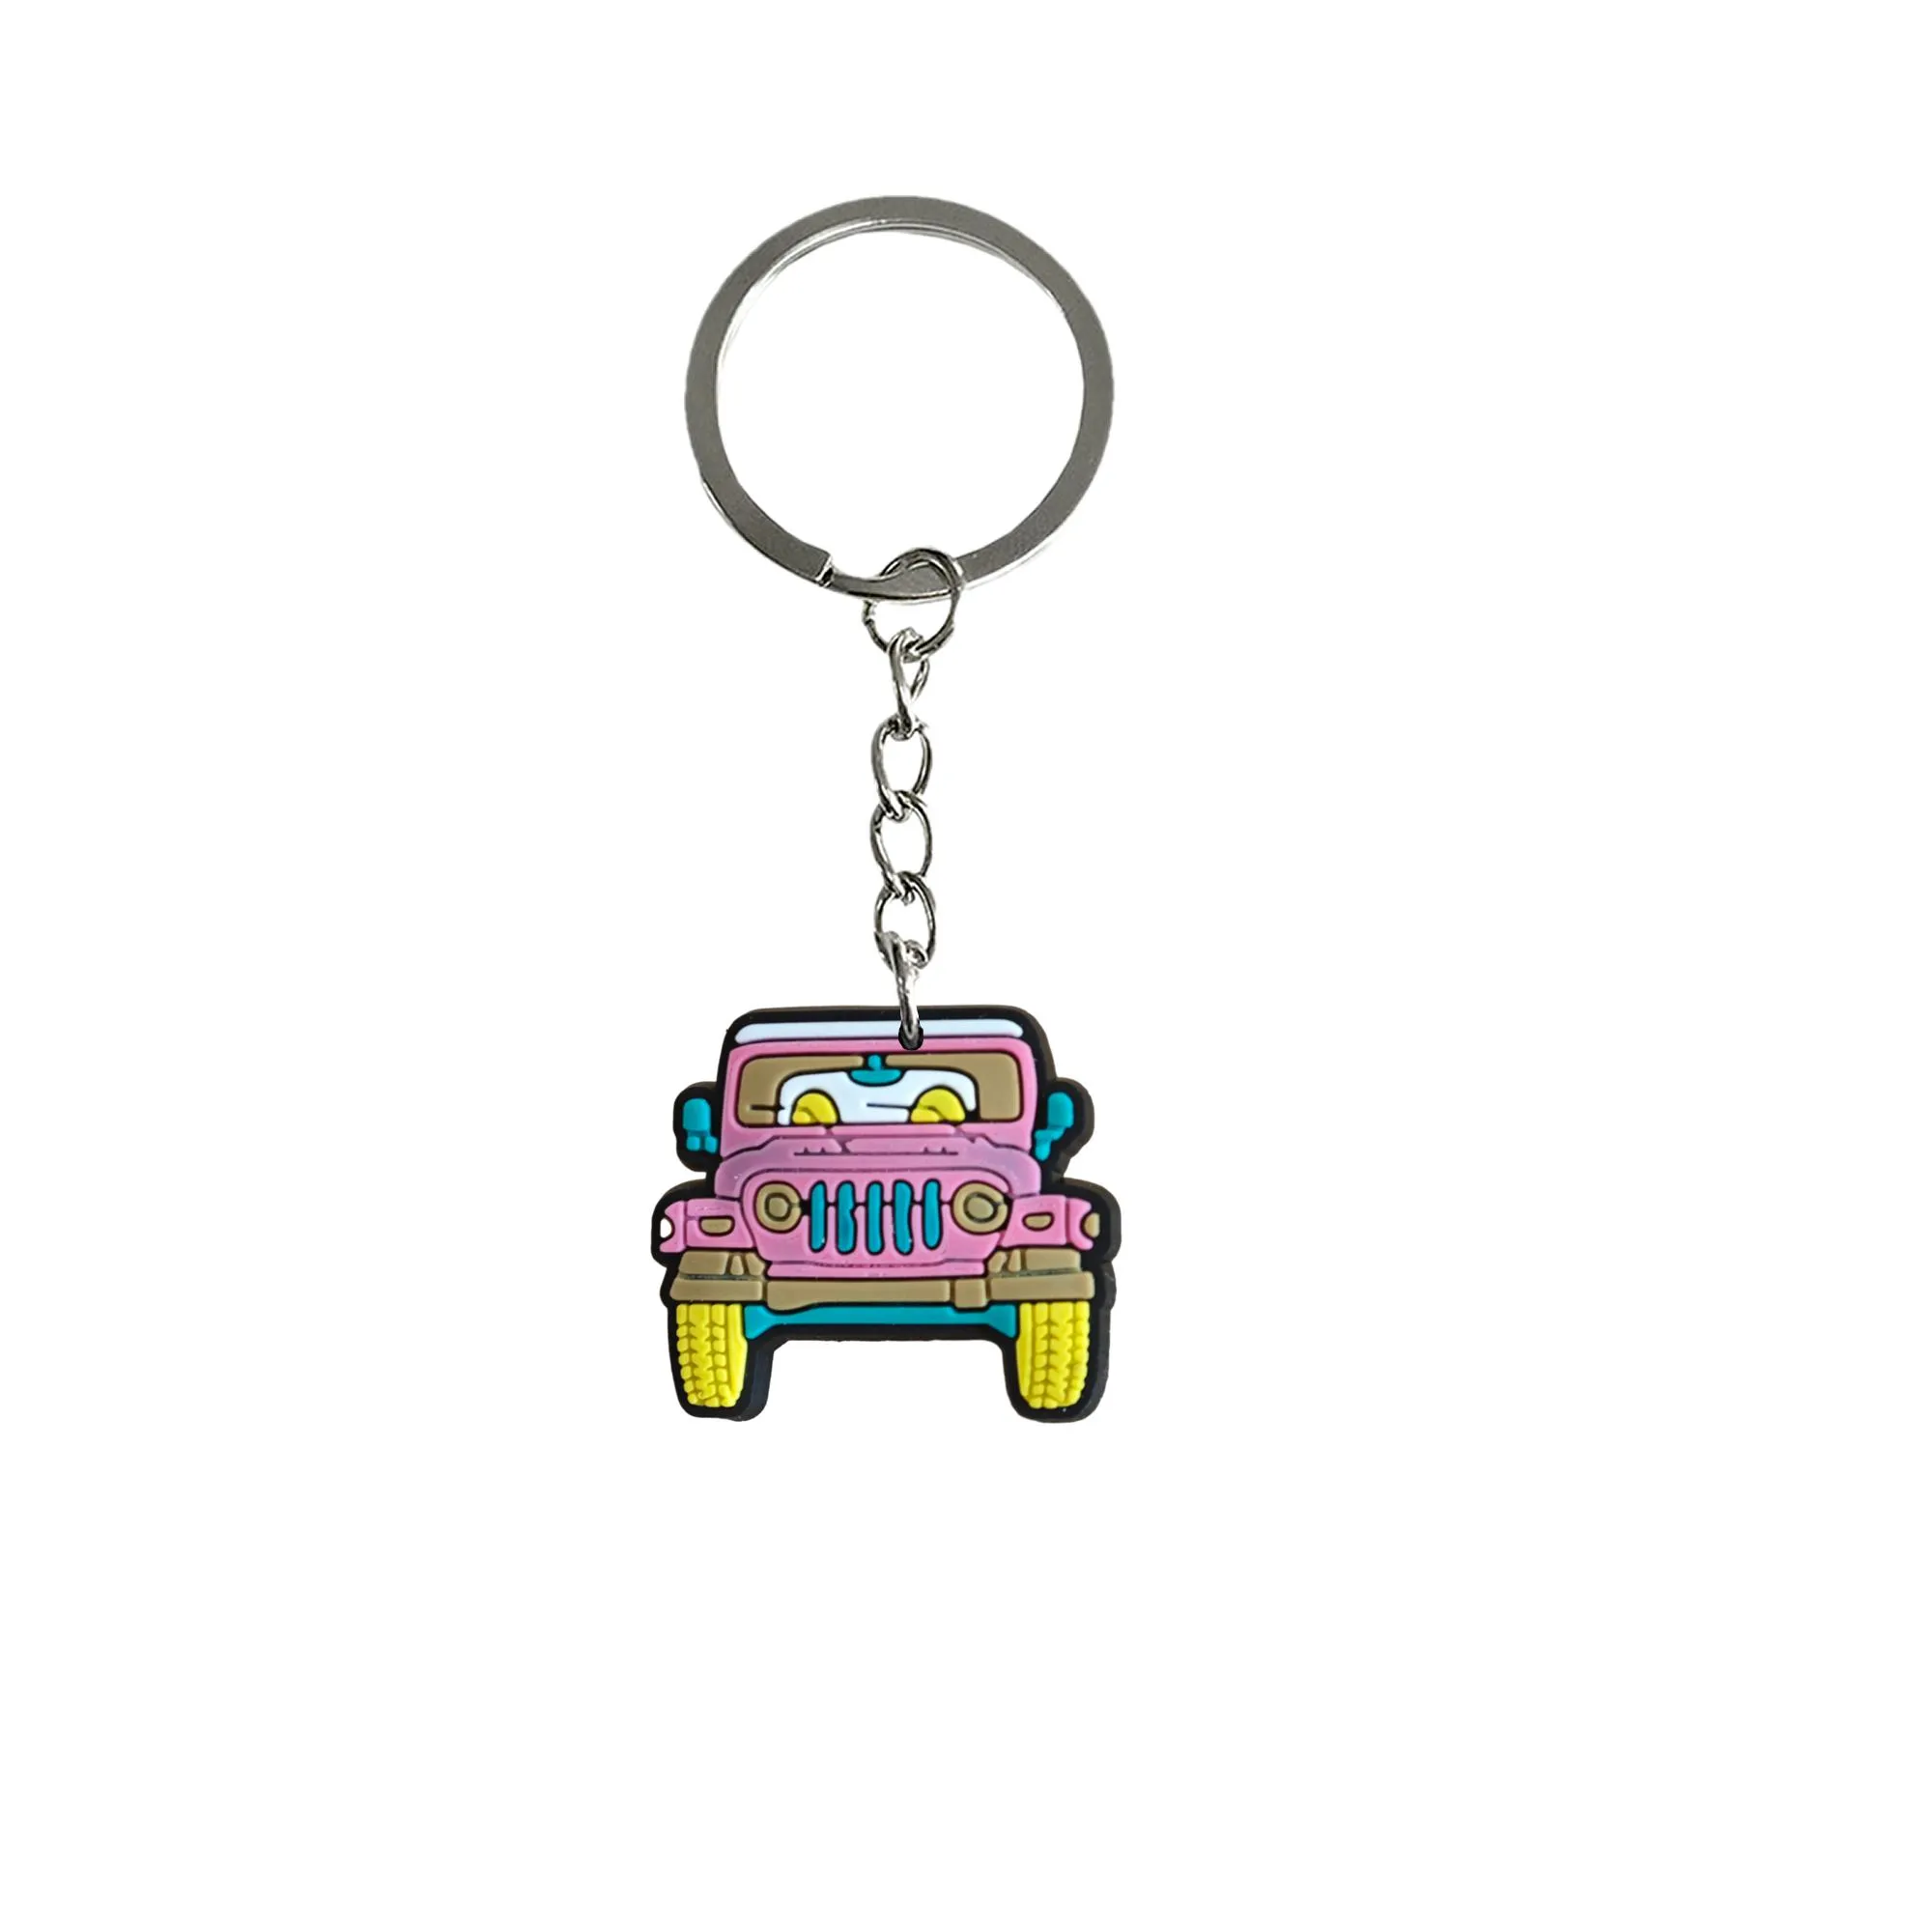 float series keychain cool colorful anime character with wristlet keyring for backpacks keyrings bags suitable schoolbag pendants accessories kids birthday party favors car bag classroom prizes